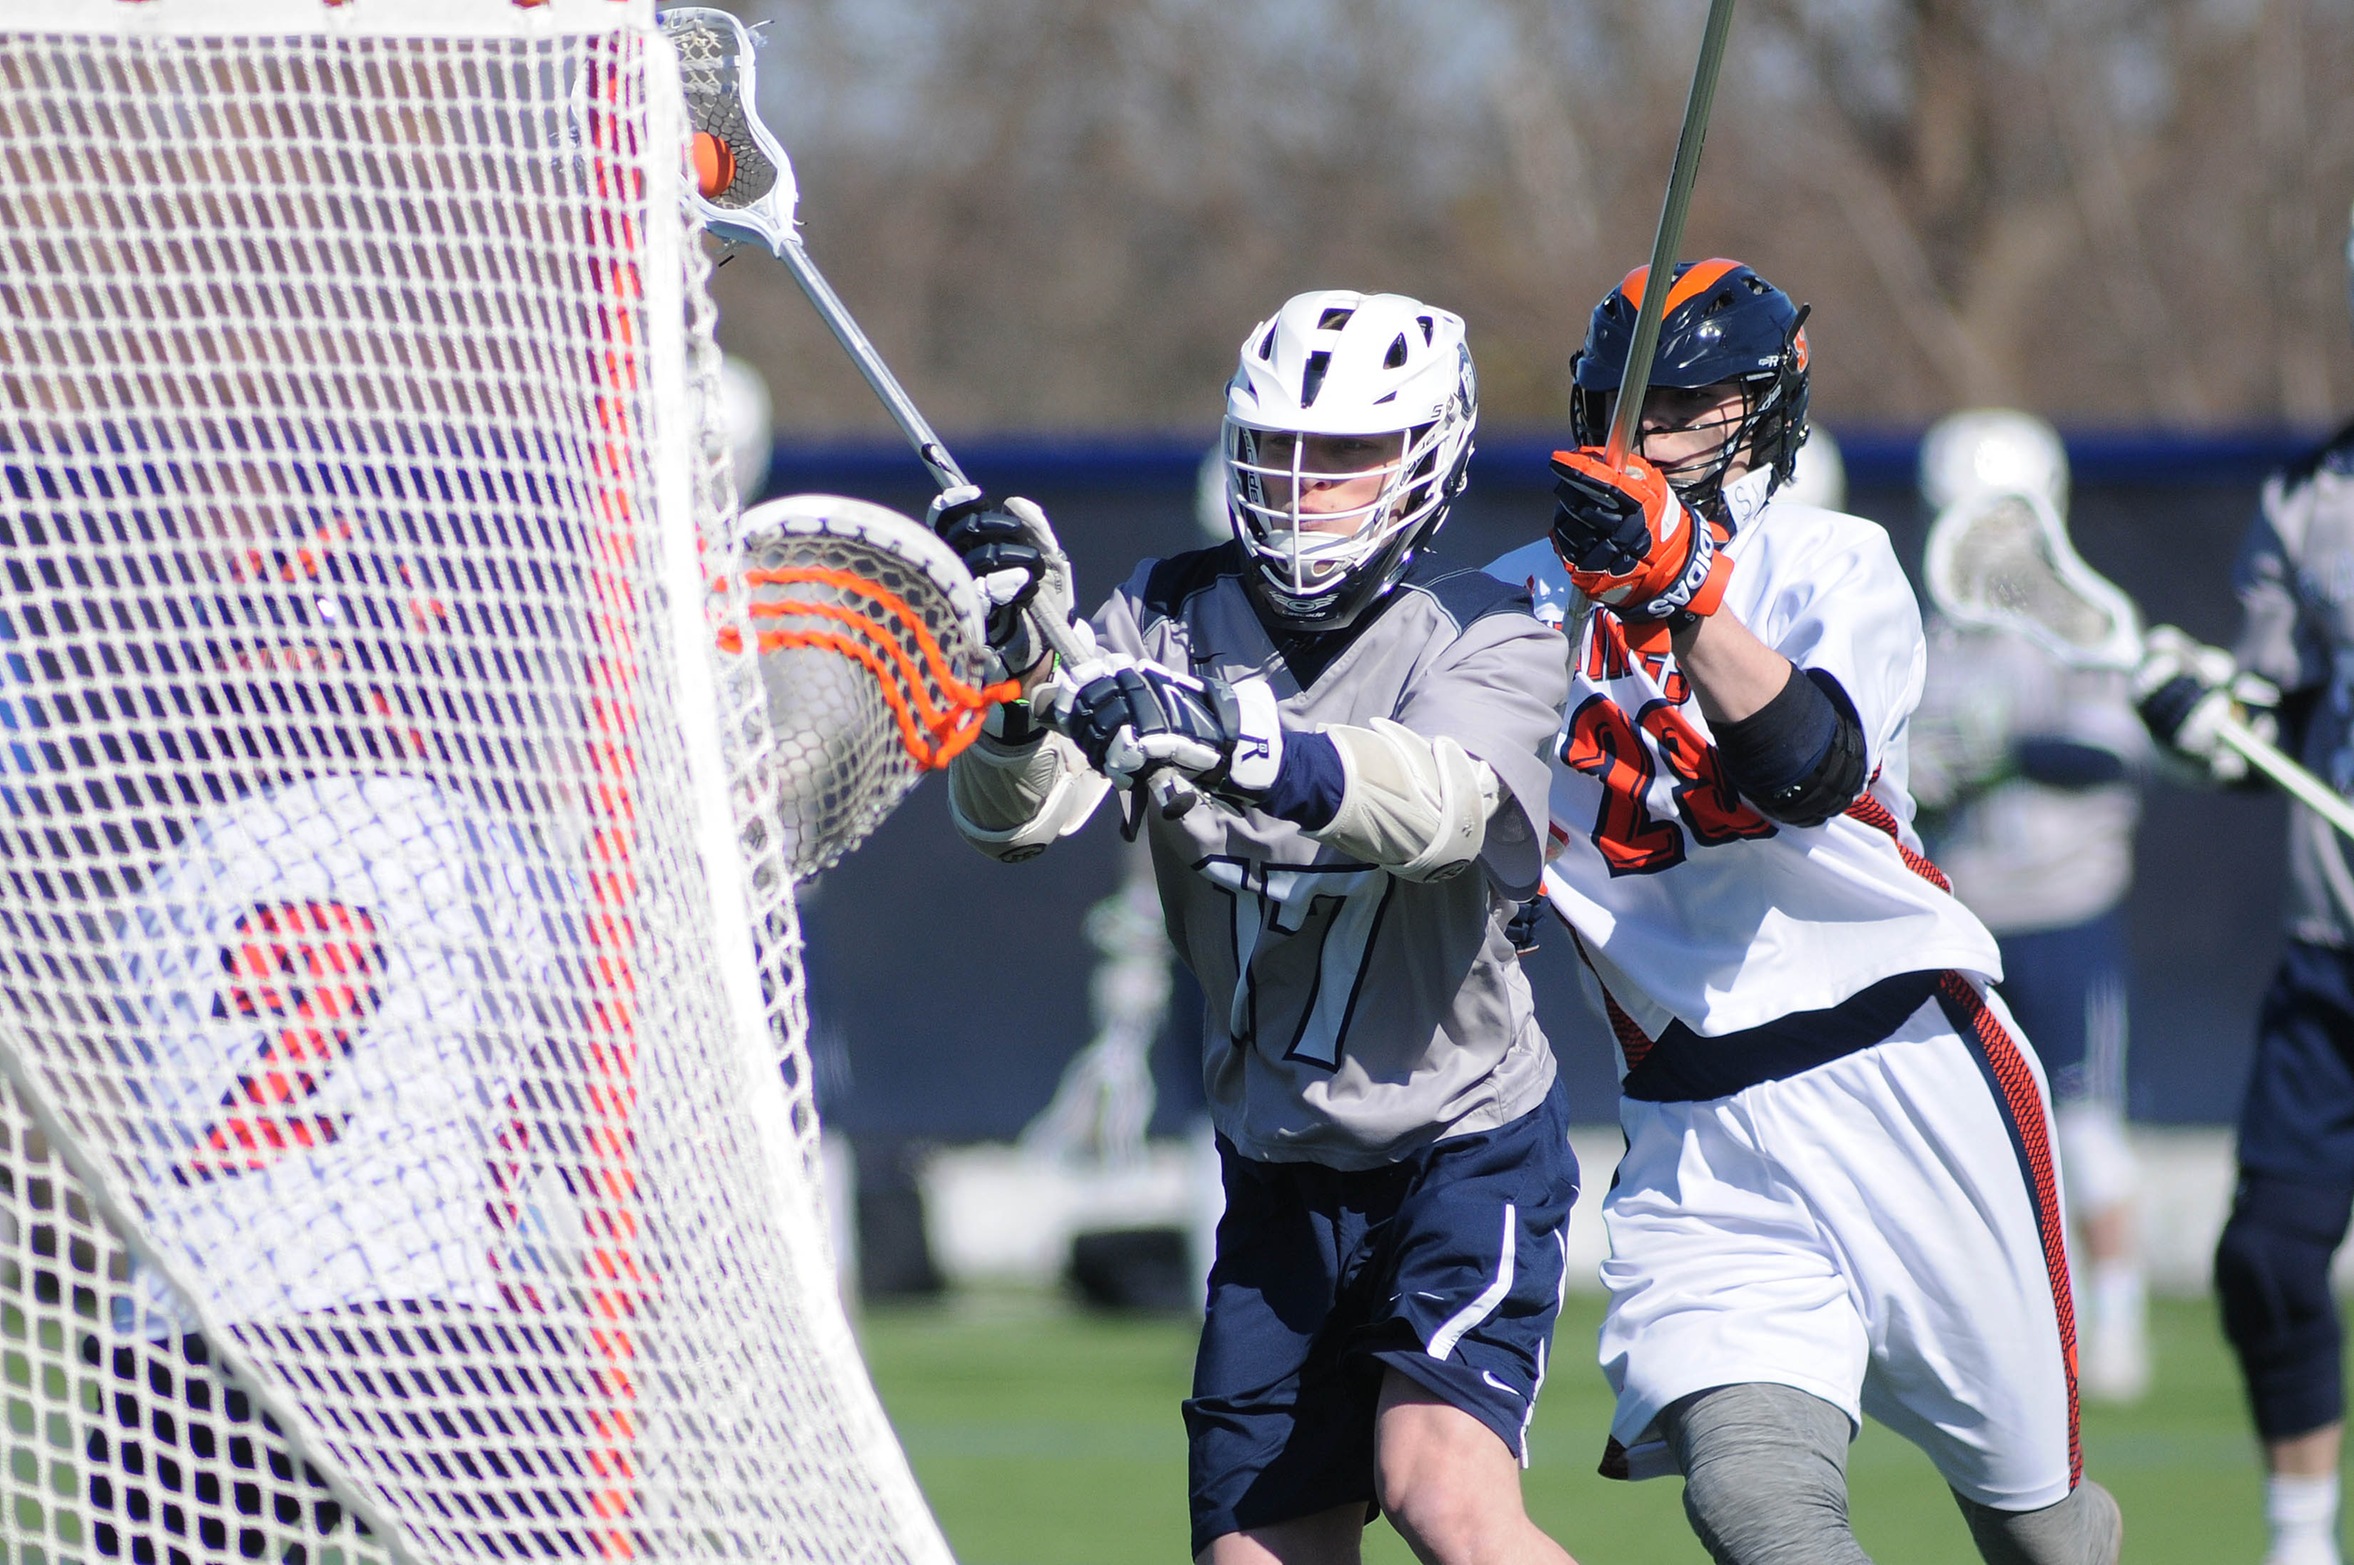 Men's Lacrosse: Raiders fall to the Cadets in a 12-6 loss.